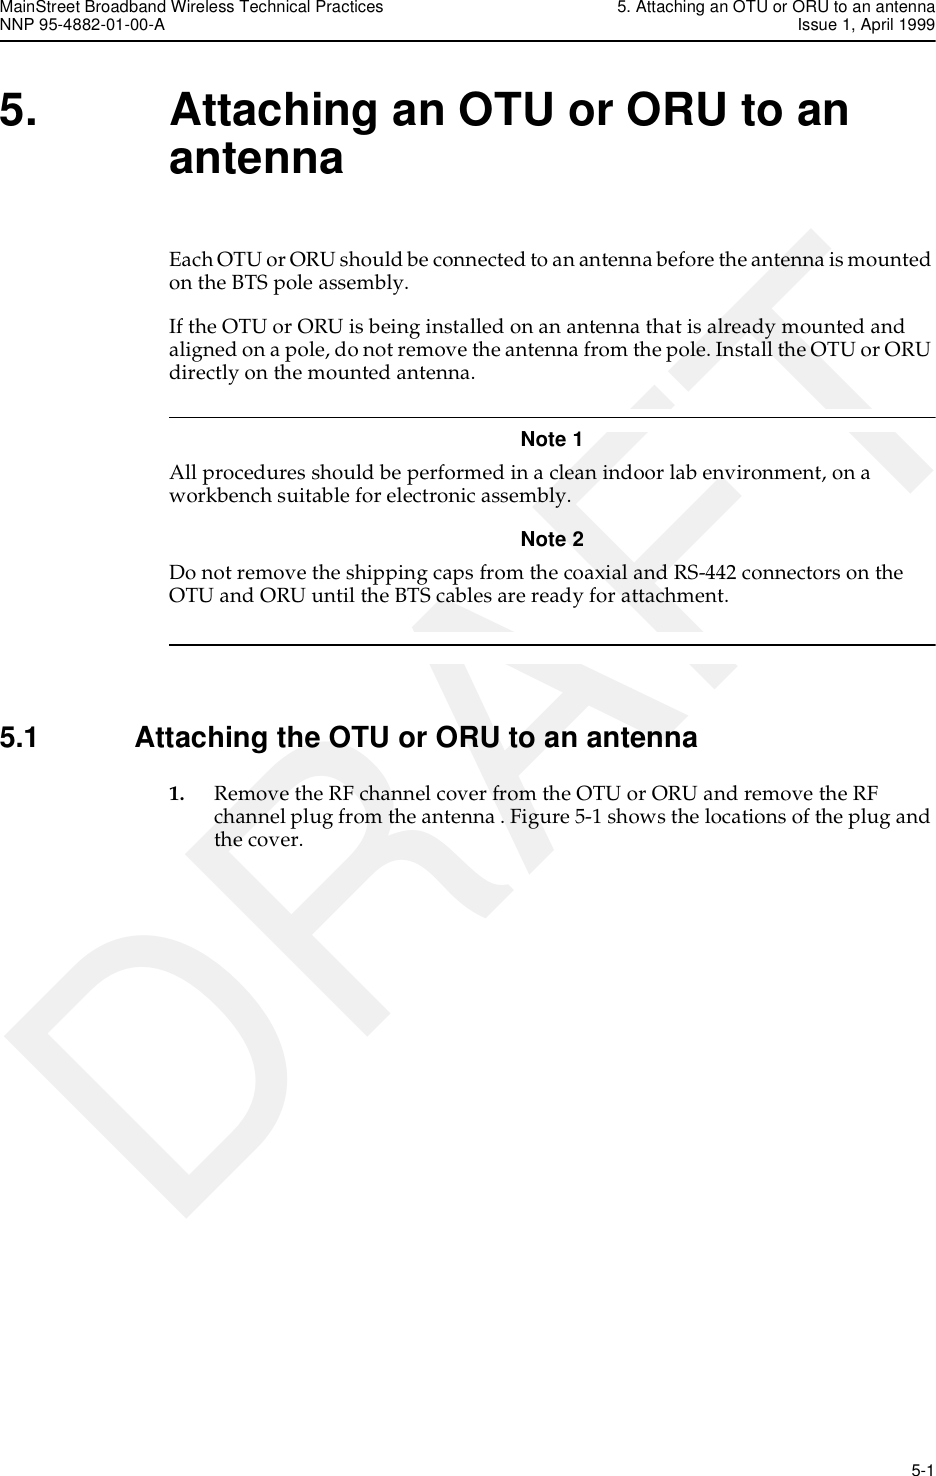 MainStreet Broadband Wireless Technical Practices 5. Attaching an OTU or ORU to an antennaNNP 95-4882-01-00-A Issue 1, April 1999   5-1DRAFT5. Attaching an OTU or ORU to an antennaEach OTU or ORU should be connected to an antenna before the antenna is mounted on the BTS pole assembly.If the OTU or ORU is being installed on an antenna that is already mounted and aligned on a pole, do not remove the antenna from the pole. Install the OTU or ORU directly on the mounted antenna.Note 1 All procedures should be performed in a clean indoor lab environment, on a workbench suitable for electronic assembly. Note 2 Do not remove the shipping caps from the coaxial and RS-442 connectors on the OTU and ORU until the BTS cables are ready for attachment. 5.1 Attaching the OTU or ORU to an antenna1. Remove the RF channel cover from the OTU or ORU and remove the RF channel plug from the antenna . Figure 5-1 shows the locations of the plug and the cover.